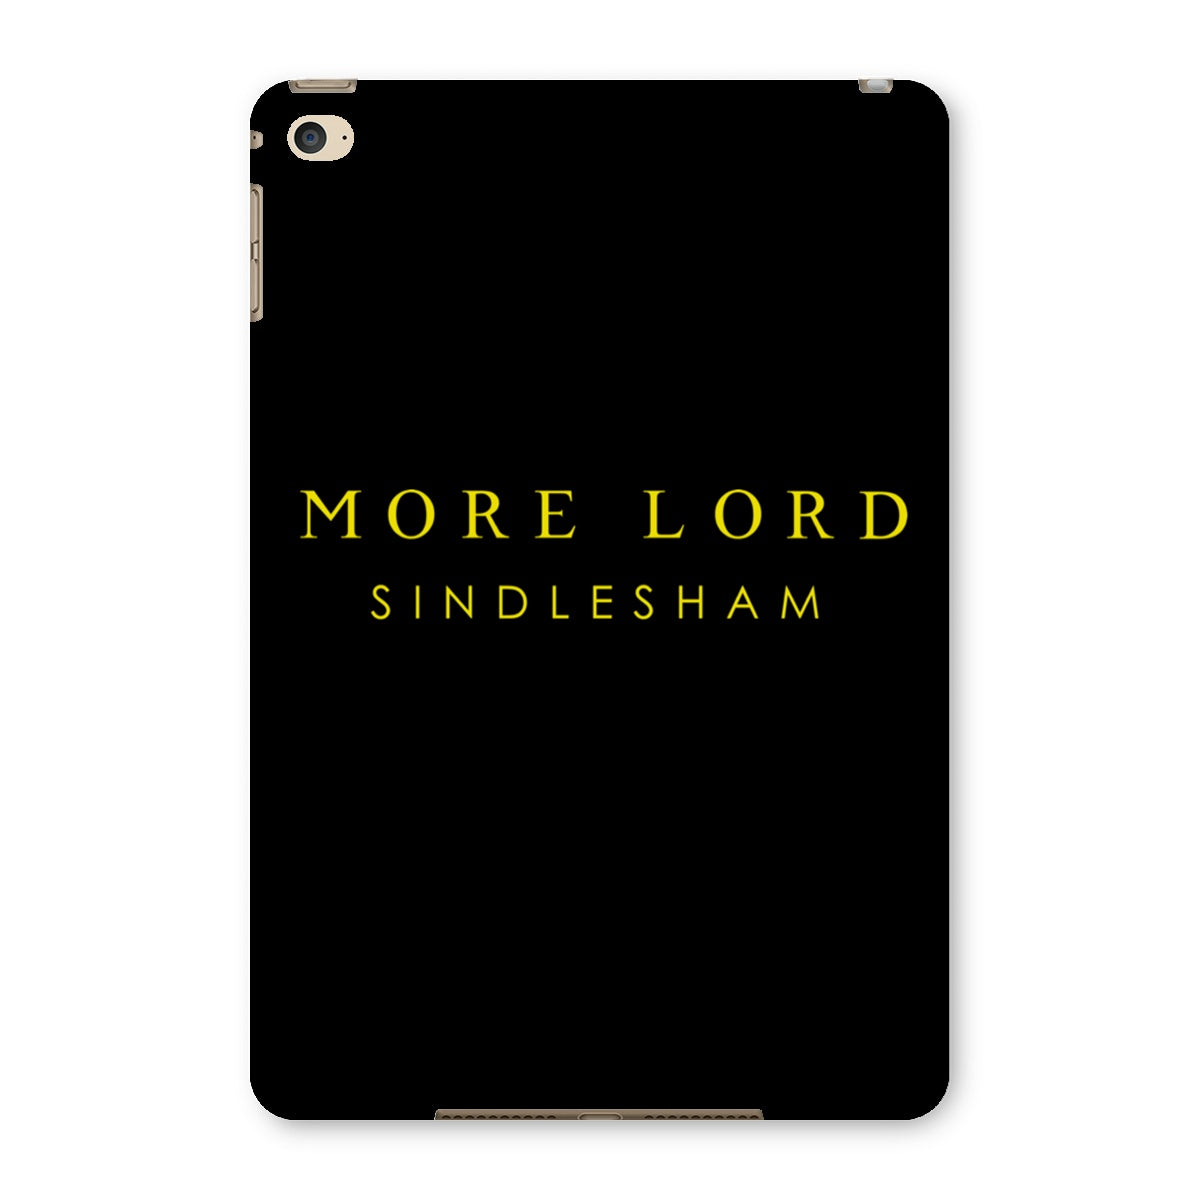 More Lord Sindlesham Tablet Cases